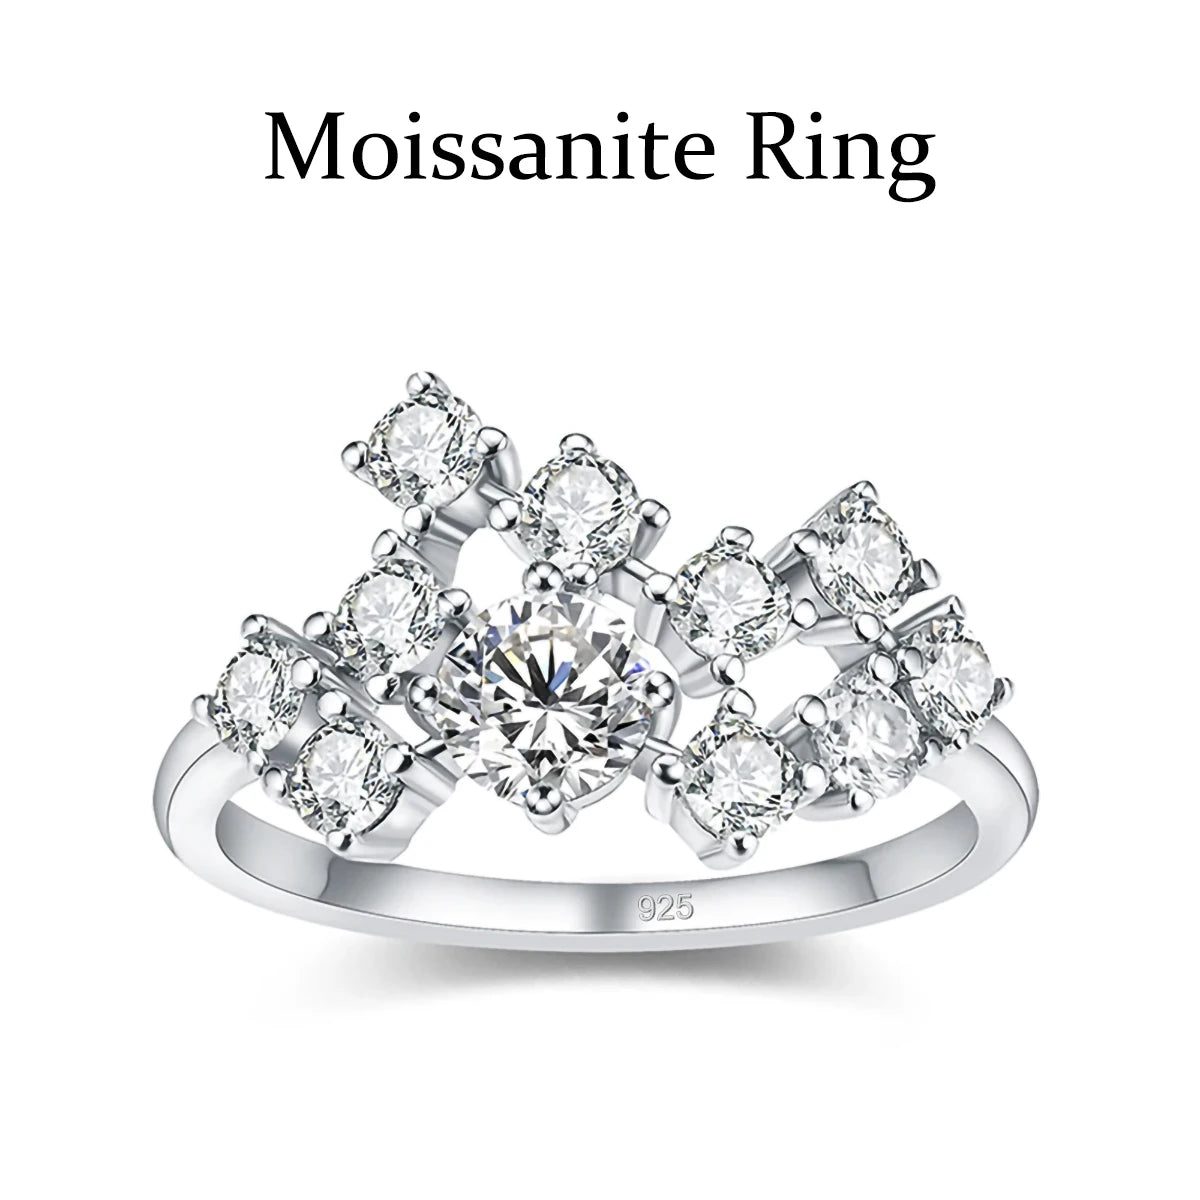 Szjinao Certified Total Is 1.5ct Full Moissanite Ring Woman With Many Stones Silver Infinity Trend Jewelry For Engagement New In